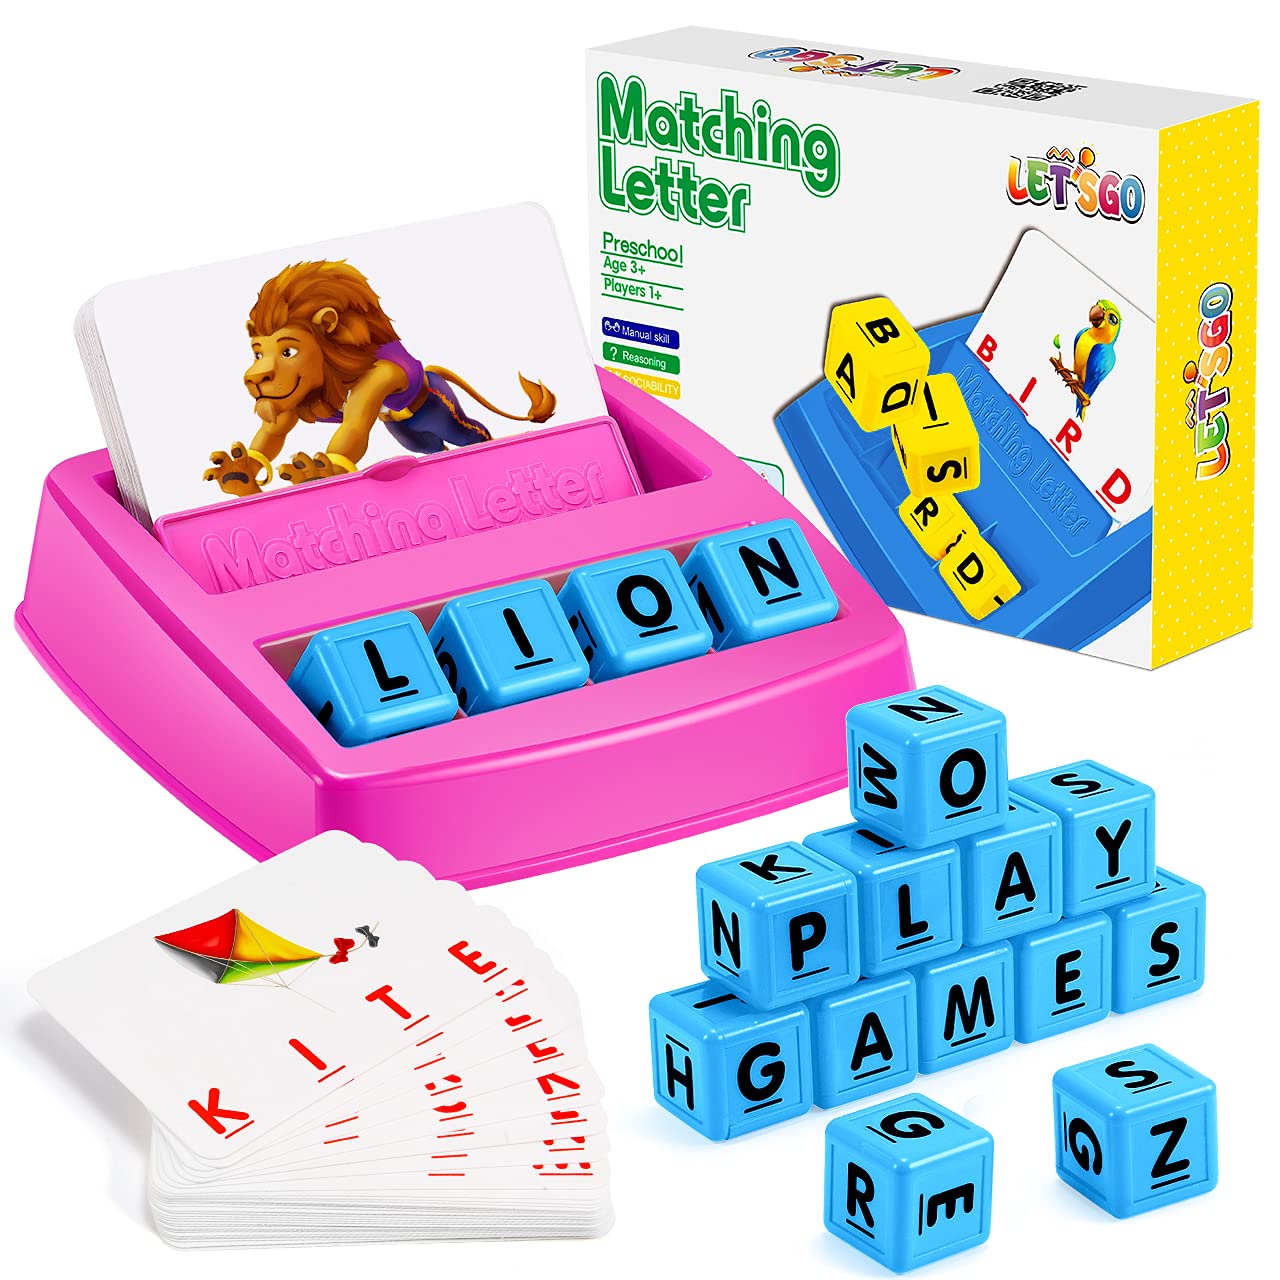 LIWIN LET'S GO! Learning Games for Kids Age 3-8, Matching Letter Game for Kids Toys Ages 3-8 Educational Toys for 3-8 Year Olds Boys Girls Christmas Birthday Gifts for 3-8 Year Olds Boys Girls Blue